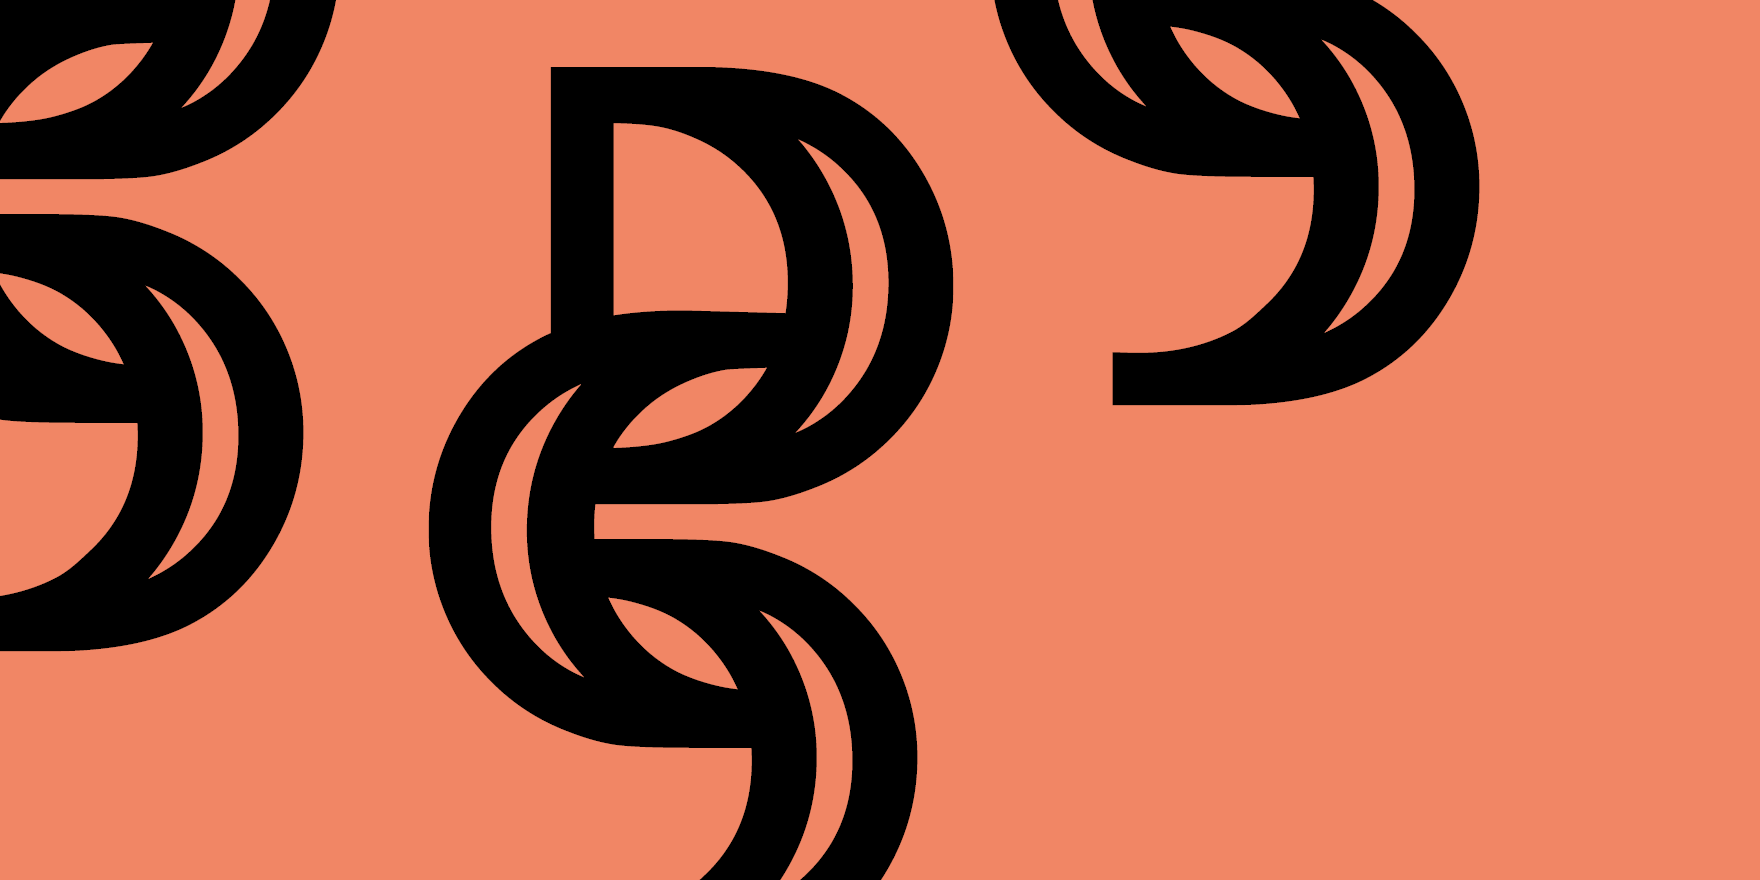 Abstract illustration of the letters D and S in black, intertwined on an orange background